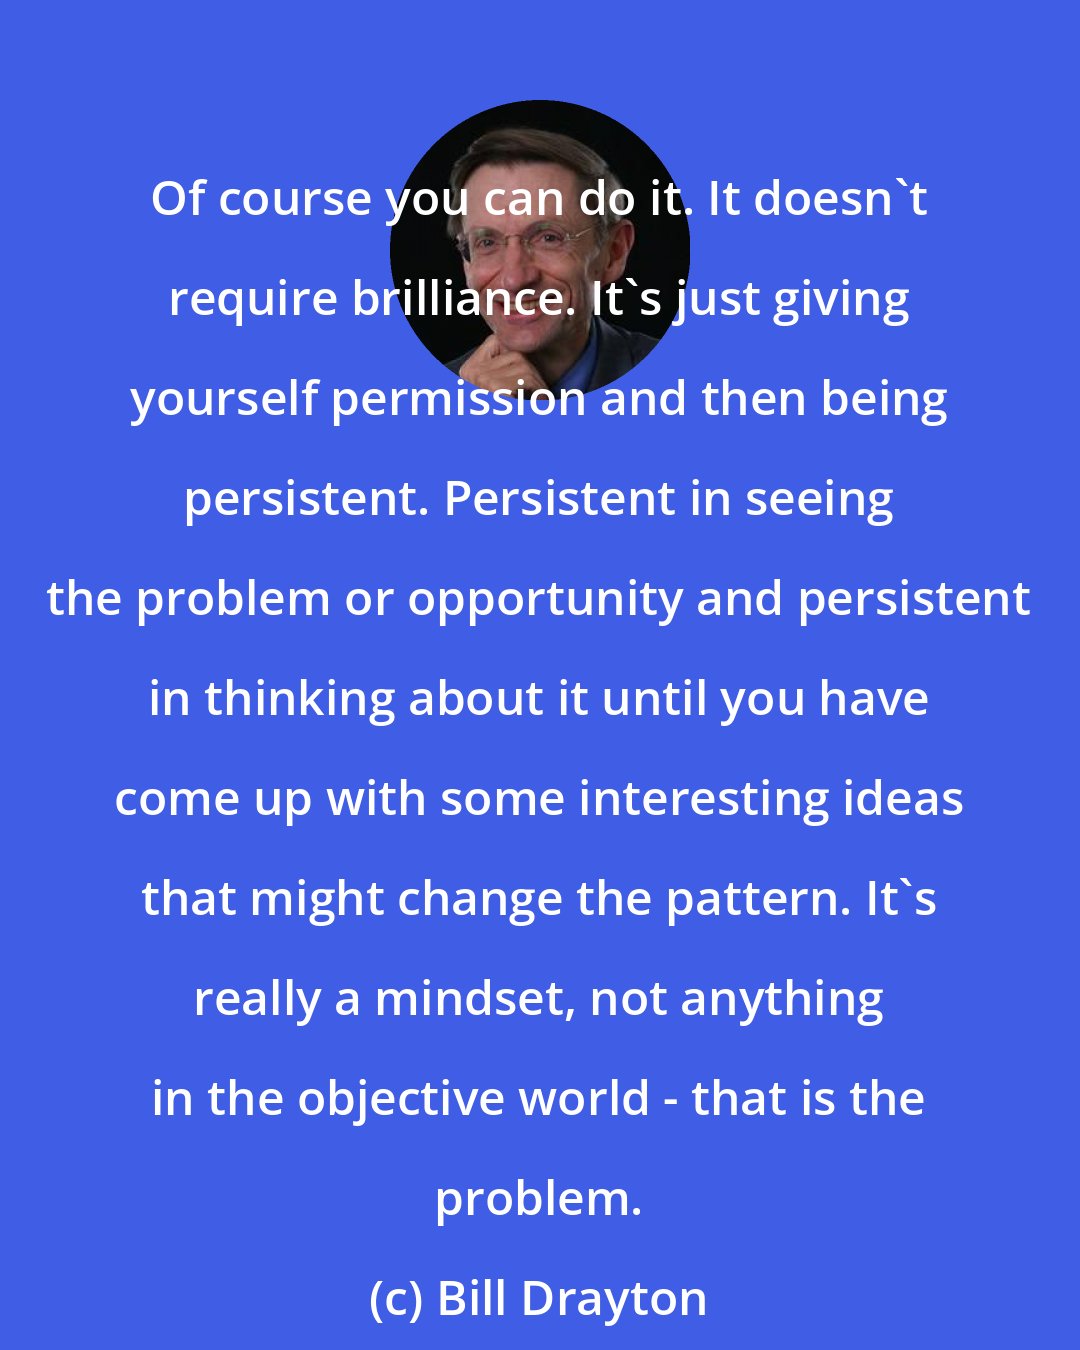 Bill Drayton: Of course you can do it. It doesn't require brilliance. It's just giving yourself permission and then being persistent. Persistent in seeing the problem or opportunity and persistent in thinking about it until you have come up with some interesting ideas that might change the pattern. It's really a mindset, not anything in the objective world - that is the problem.